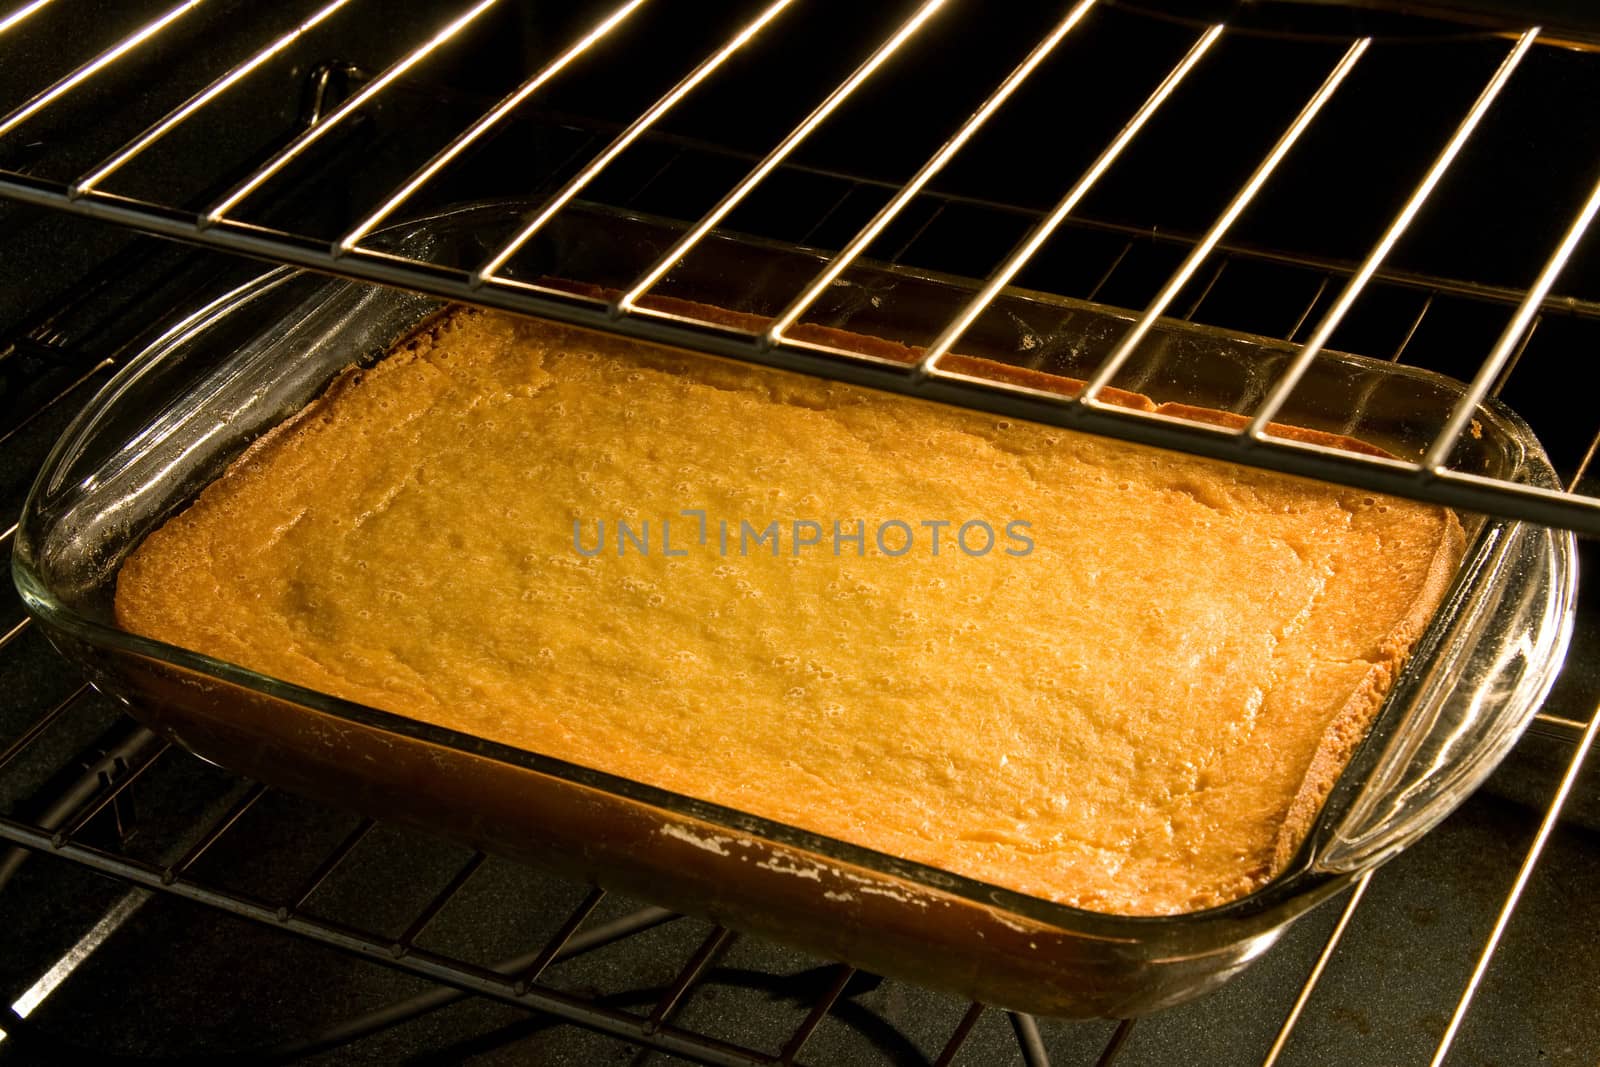 Rectangular glass pan in the oven with cornbread or corn cake.